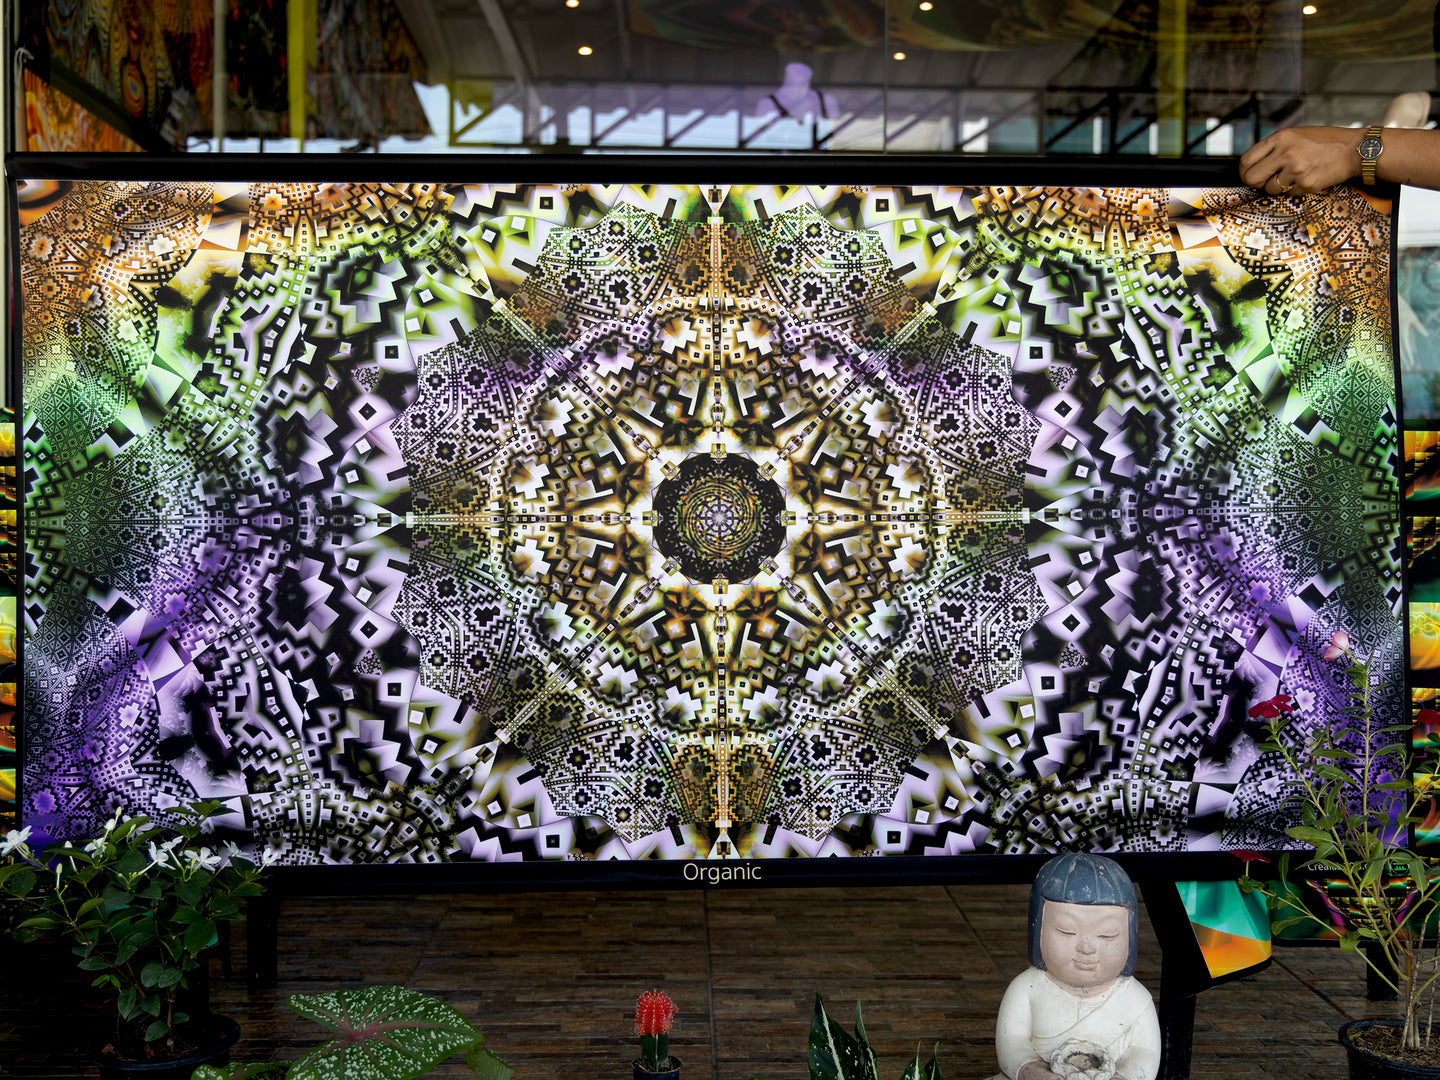 Organic UV psychedelic trippy MaOrganic UV psychedelic trippy mandala tapestry for home or festival decor by Crealab108 Koh Pha Ngan